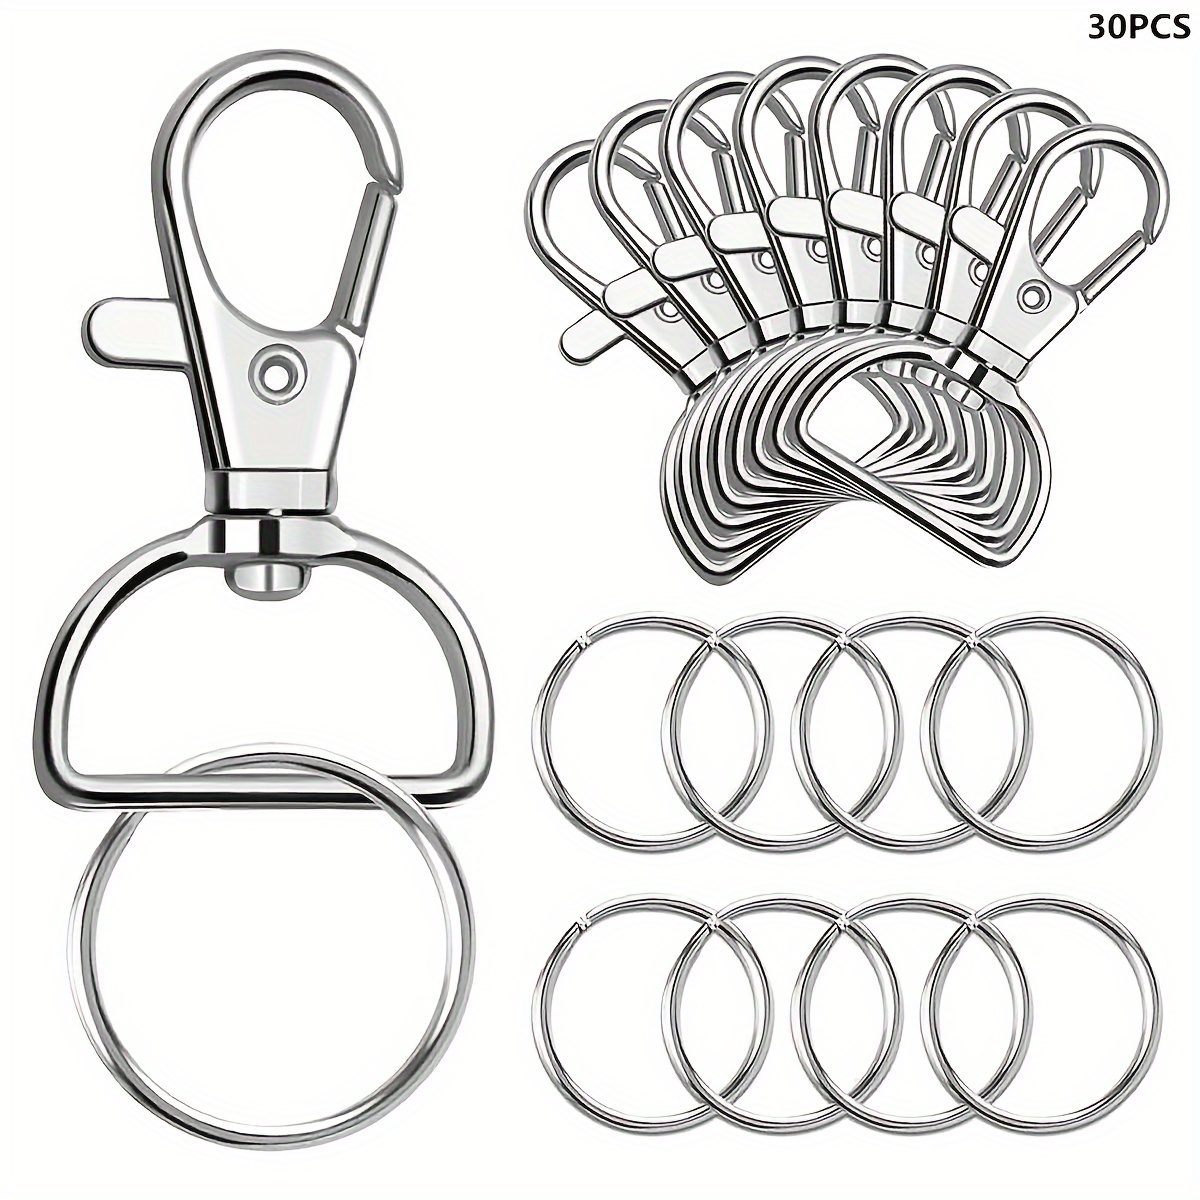 

30-piece Zinc Alloy Swivel Clasps With Lanyard Snap Hooks, Keychain Clips & D Rings - Ideal For Diy Crafts, Purse Hardware & Sewing Projects